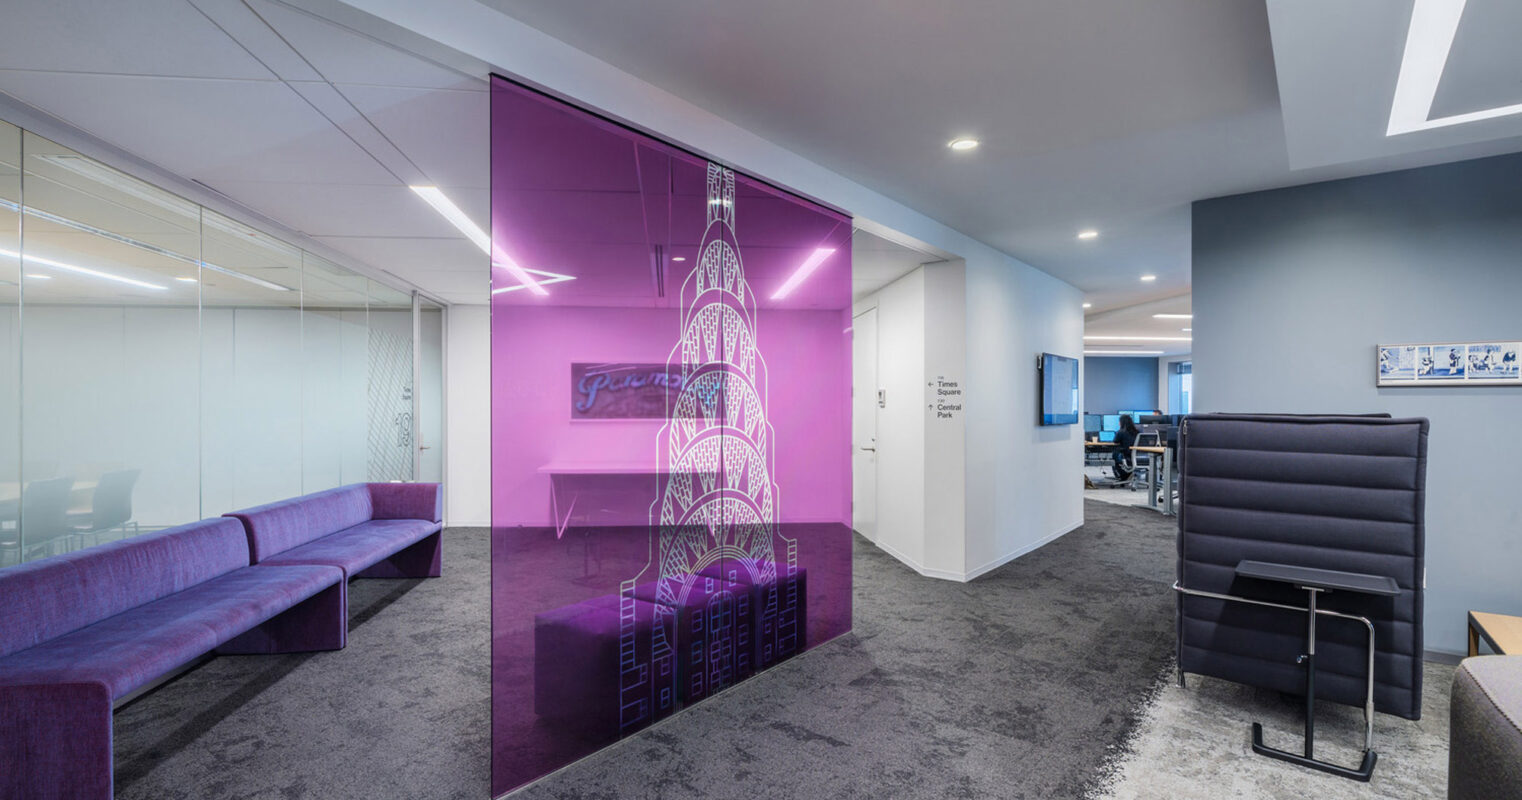 Modern office space with a vibrant, purple glass partition featuring an etched Eiffel Tower design. Sleek gray flooring juxtaposes the plush purple sofas, while white walls and angular light fixtures enhance the contemporary aesthetic.